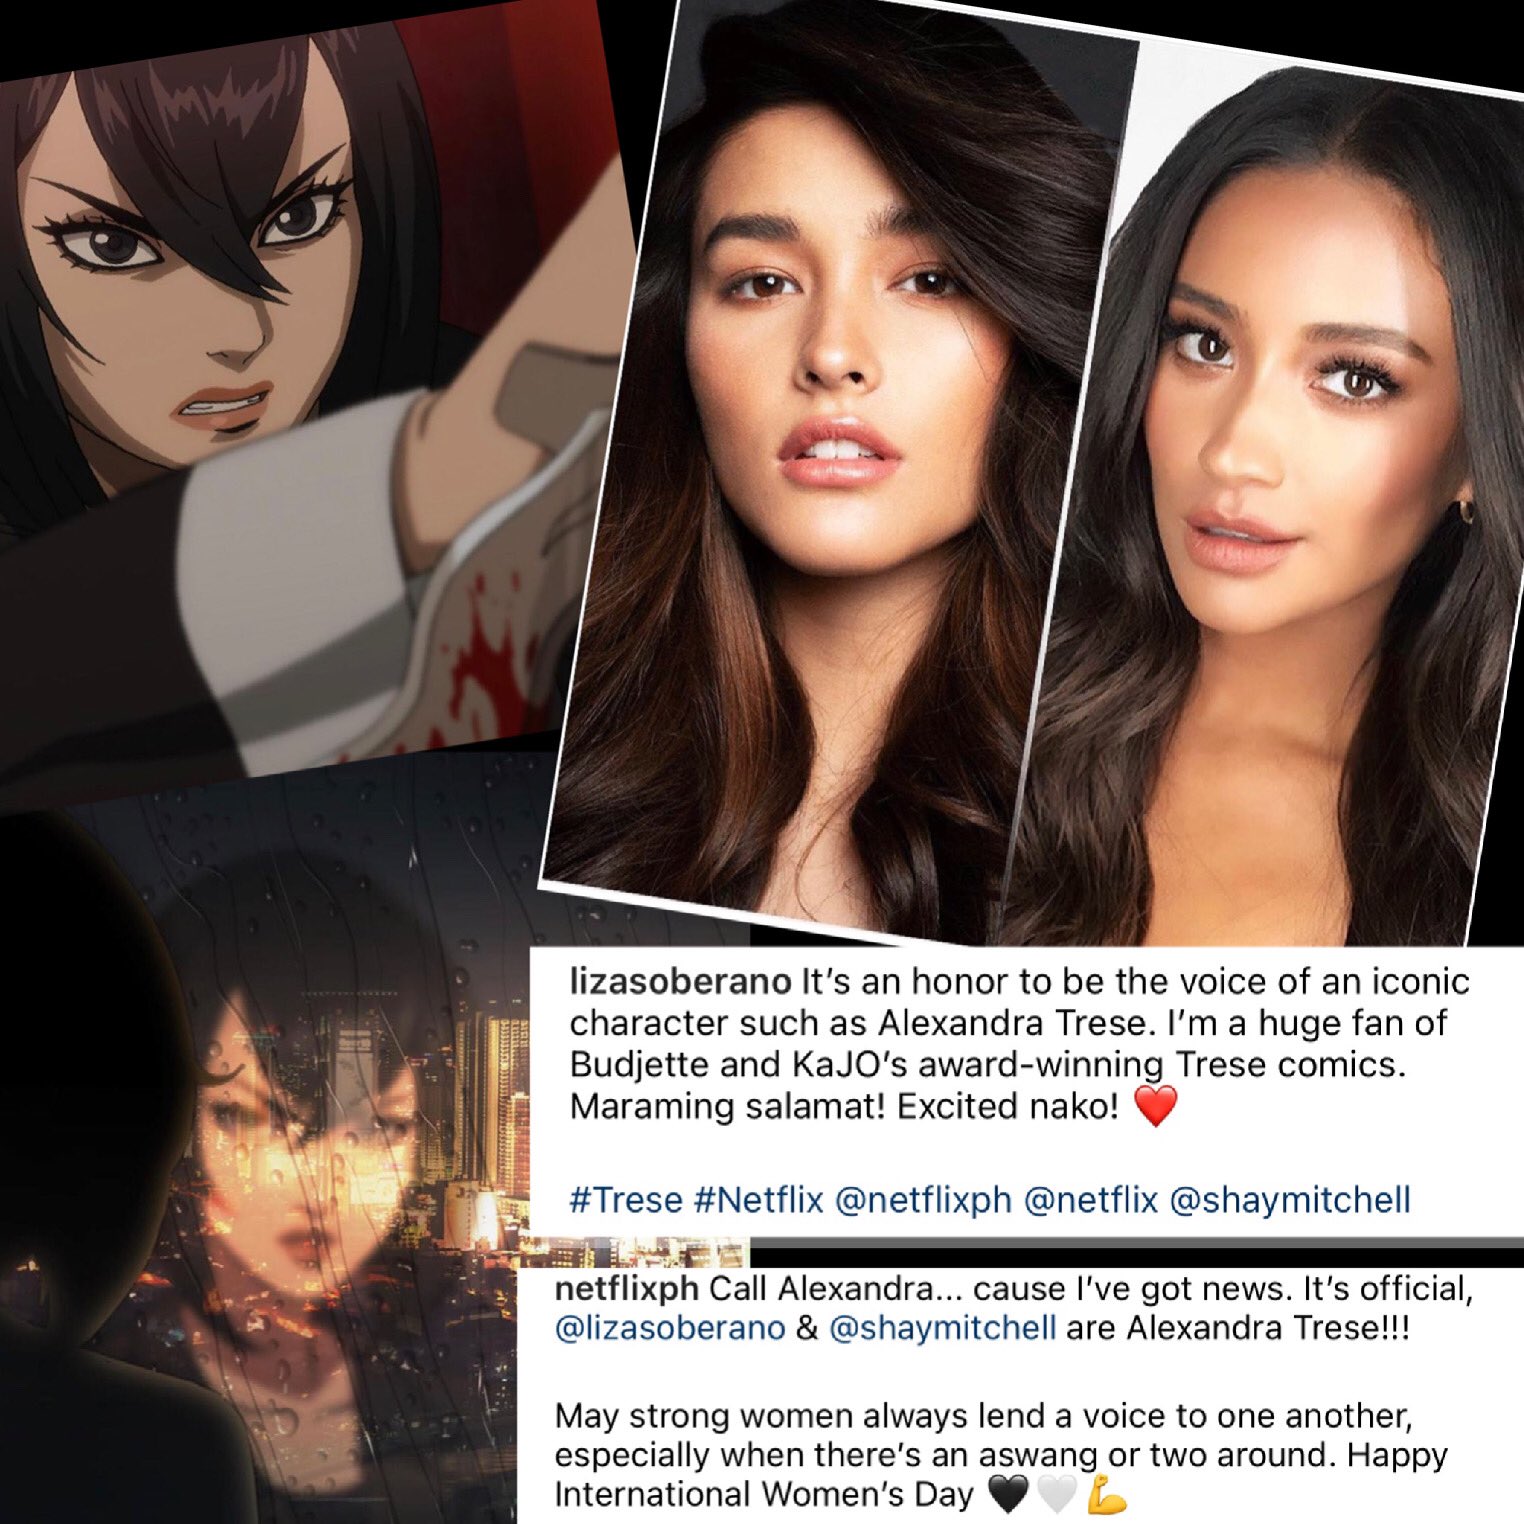 CinemaBravo - LOOK: Official poster for new Netflix Original Anime Series  #Trese, starring Liza Soberano and Shay Mitchell, voicing Alexandra Trese  for Filipino and English dubs respectively. Premieres June 11 on Netflix.